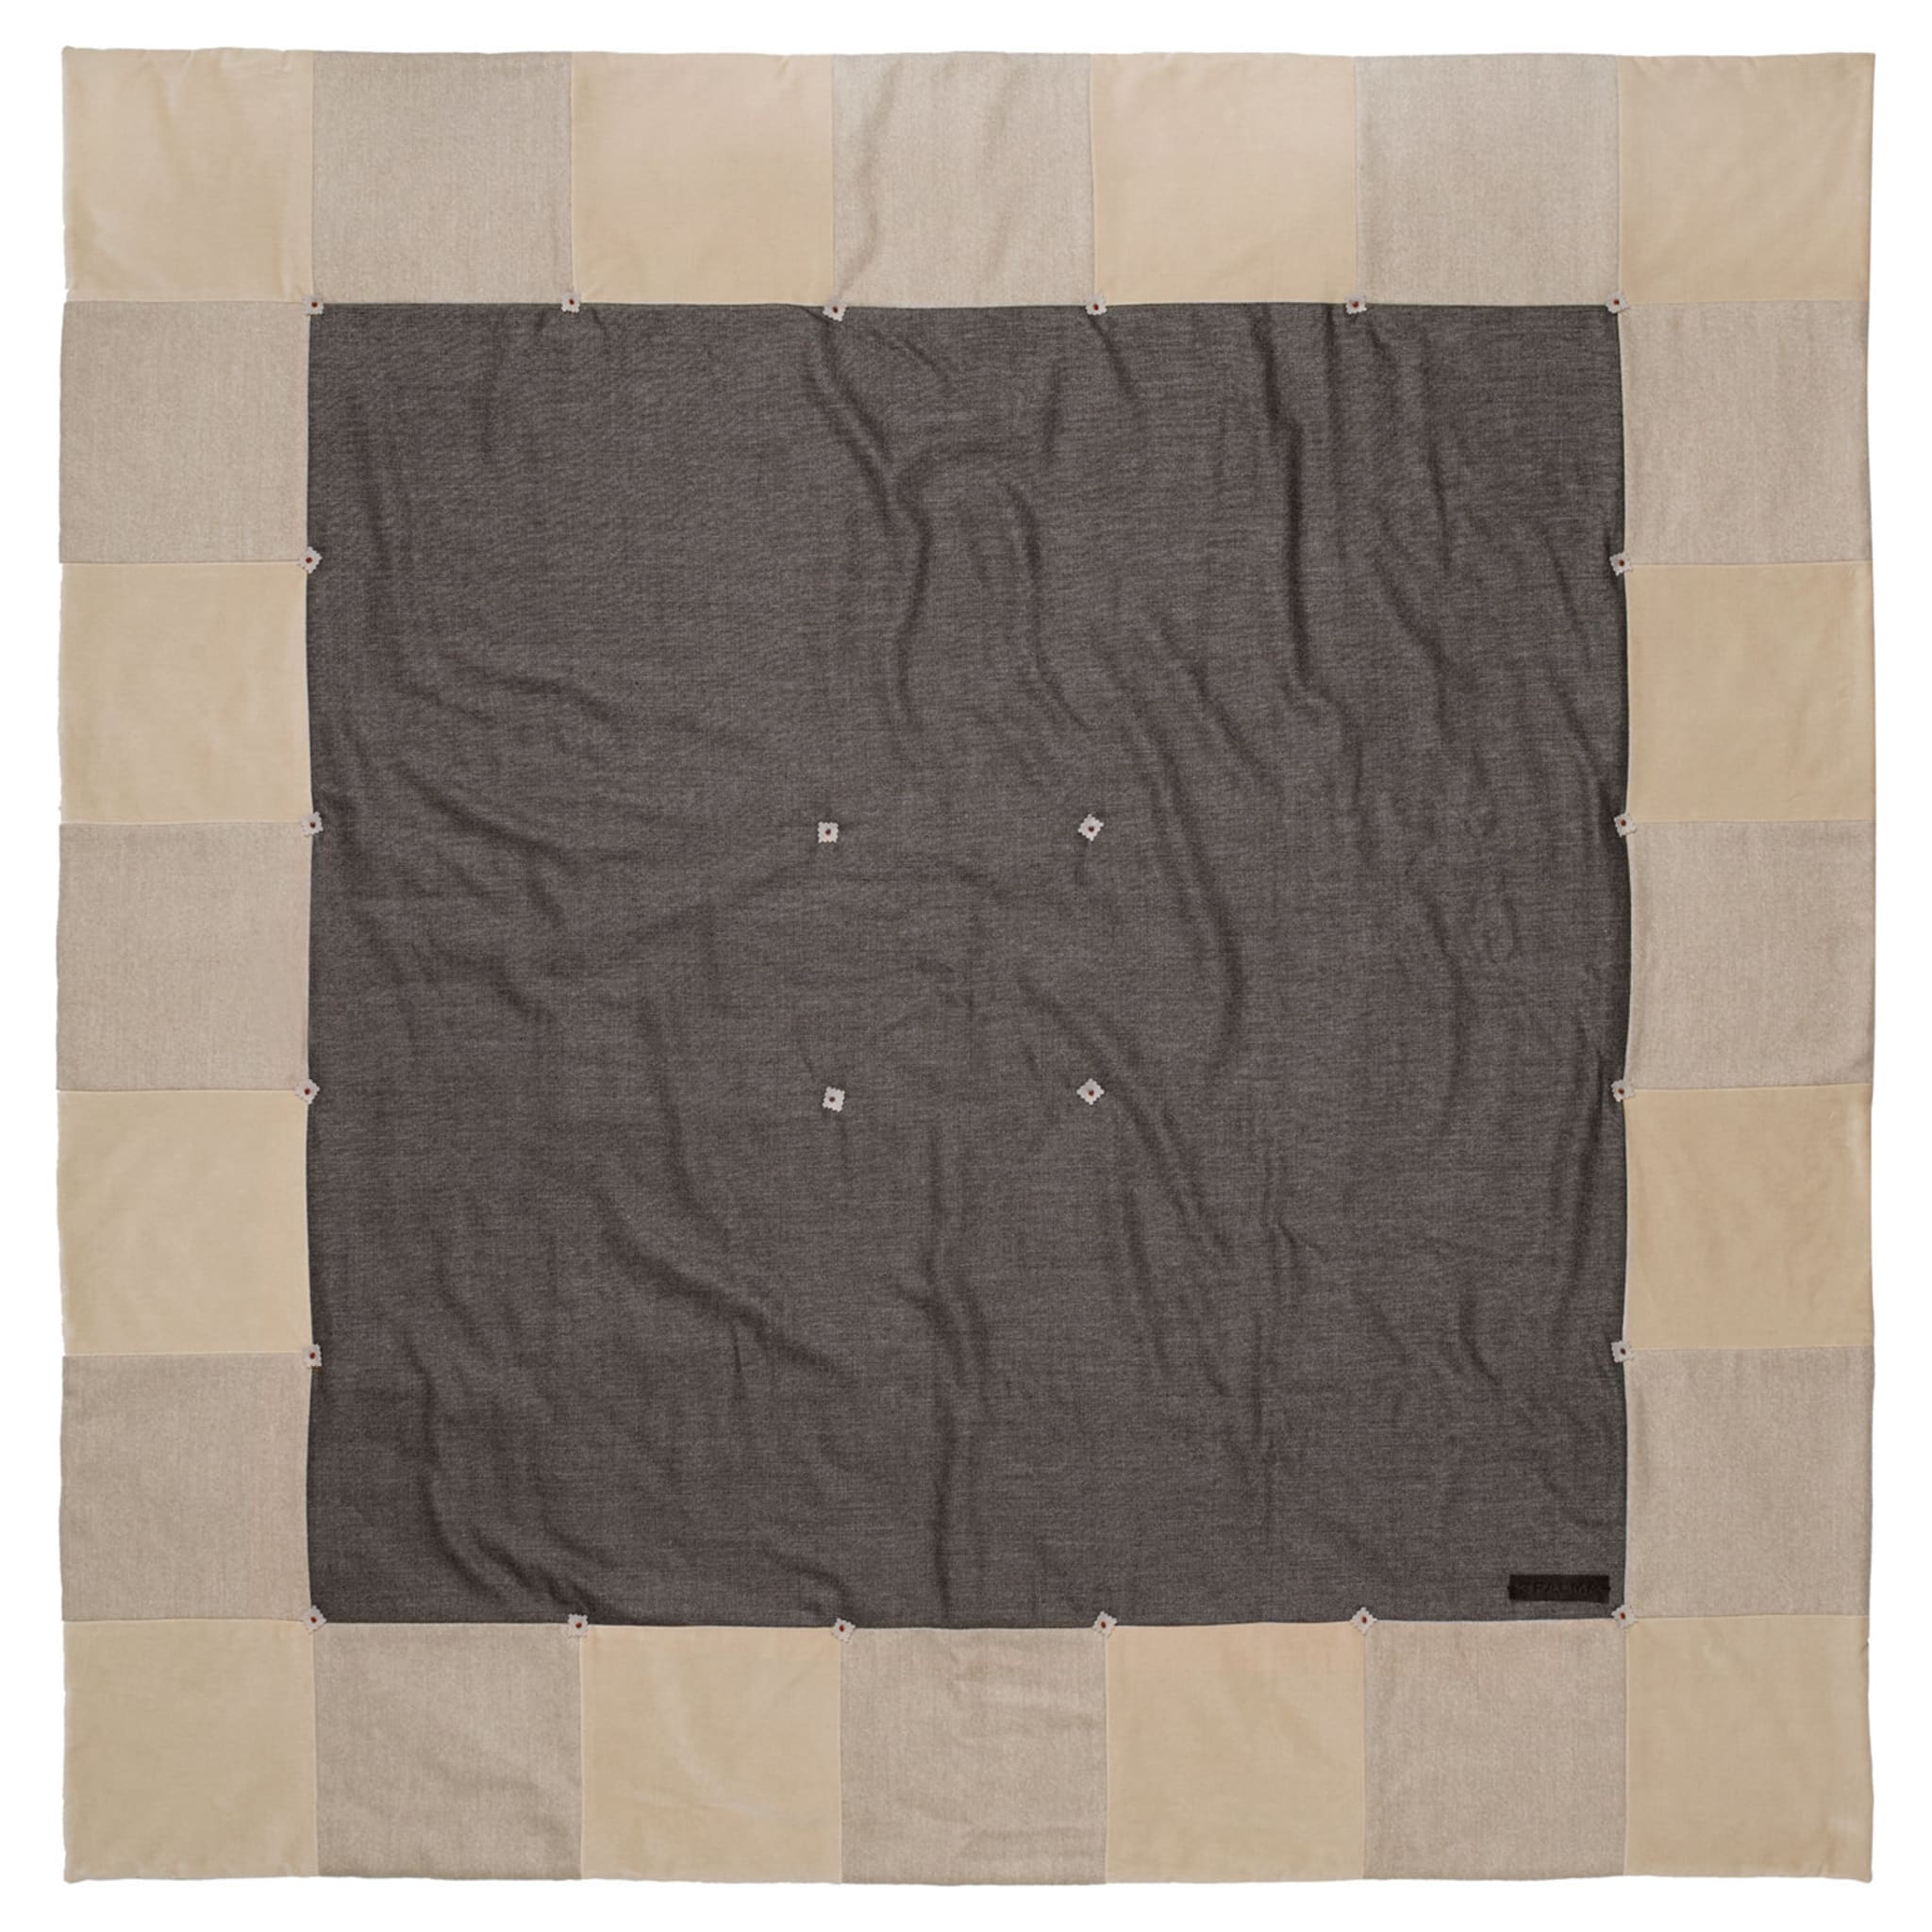 Blanched Almond and Ivory Throw - Alternative view 1